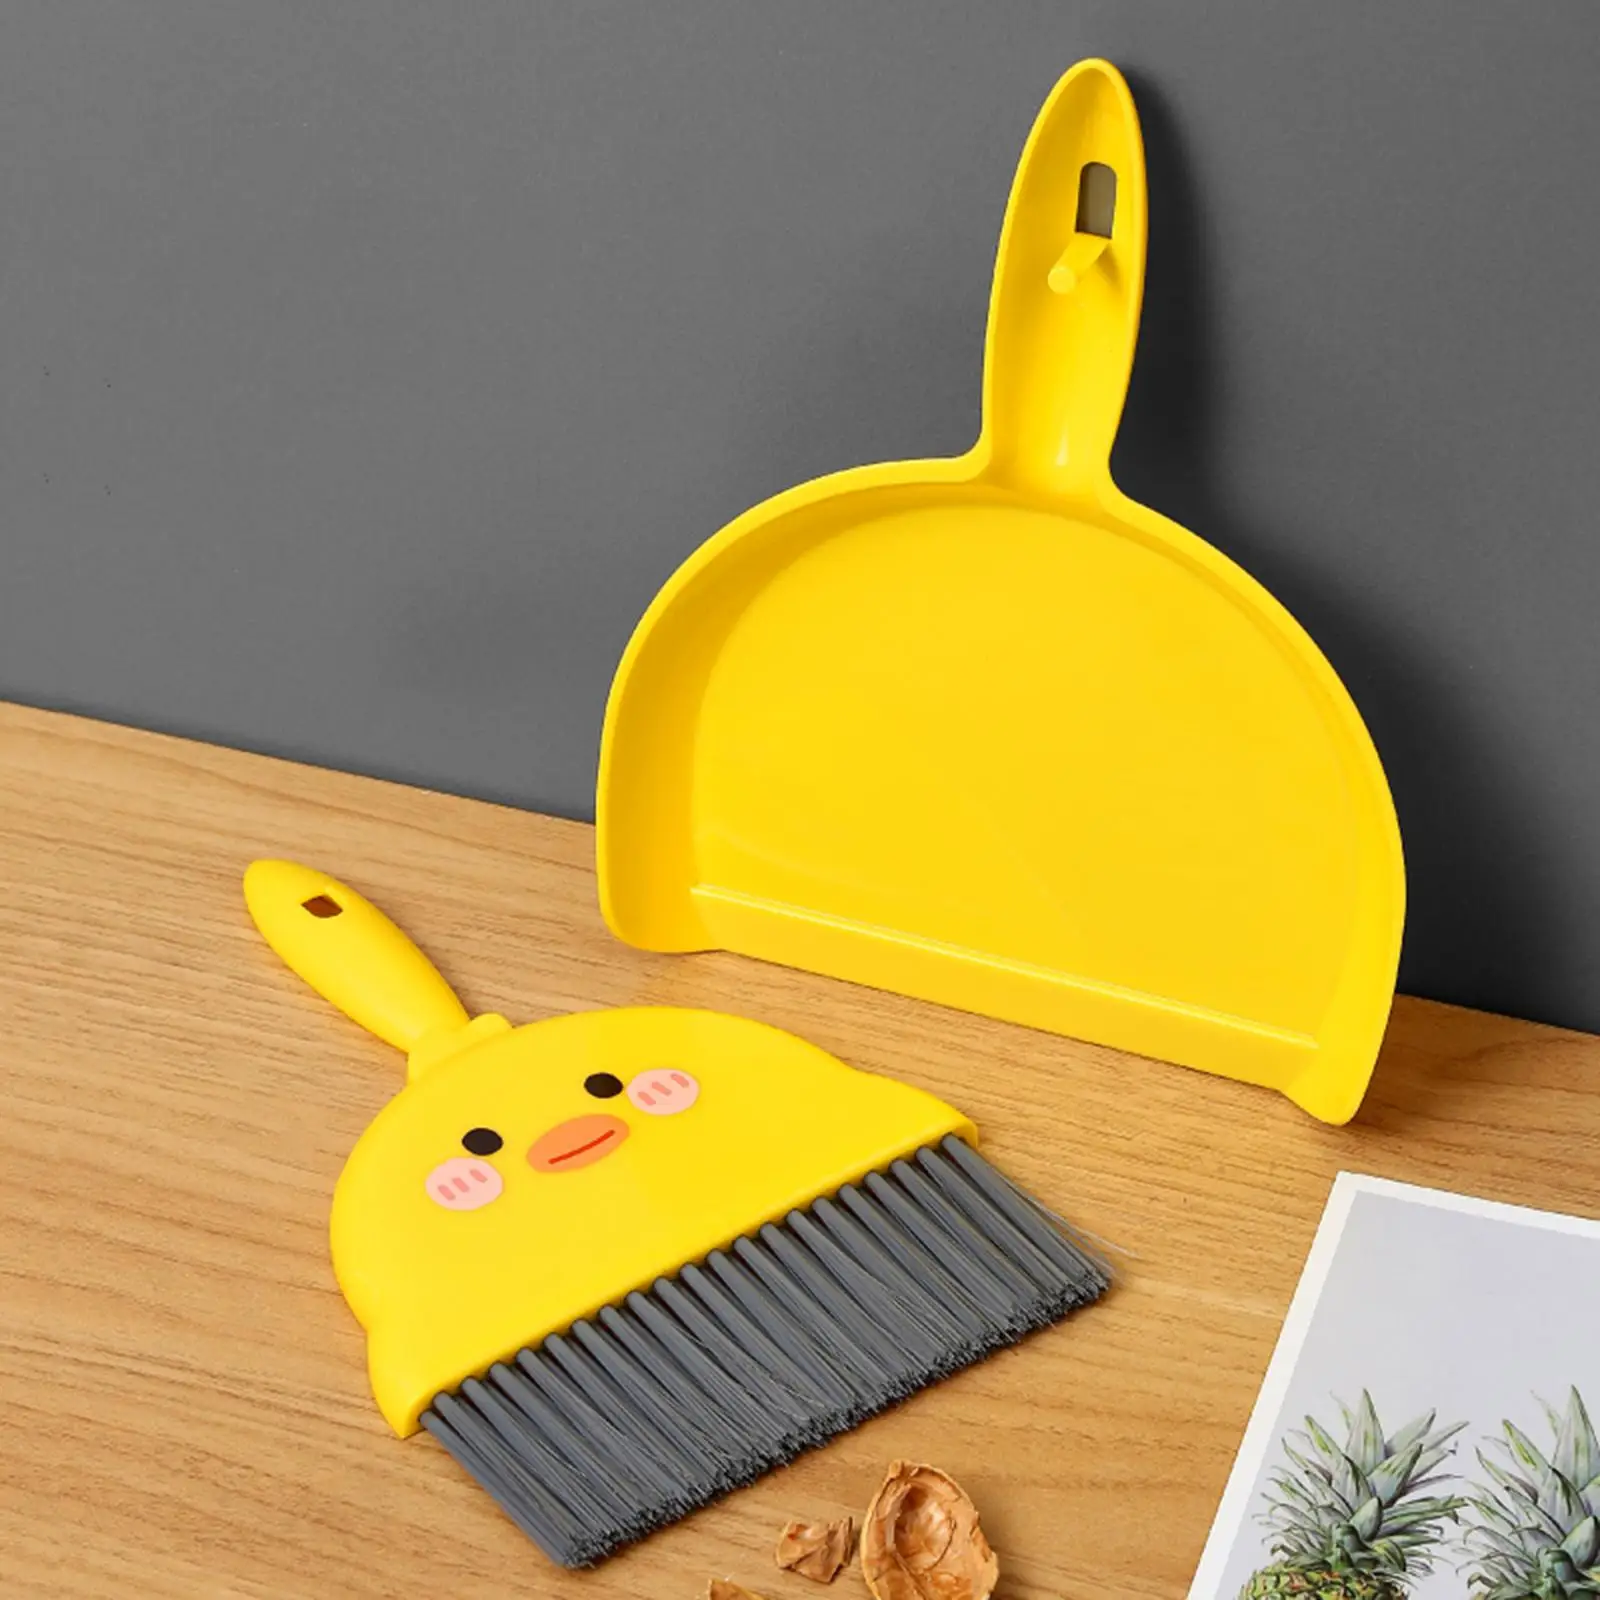 Mini Broom and Dustpan Set Mini Dustpan and Brush Set for Housekeeping Play Set Sofa Cleaning for Kids Living Room Cleaning Toys